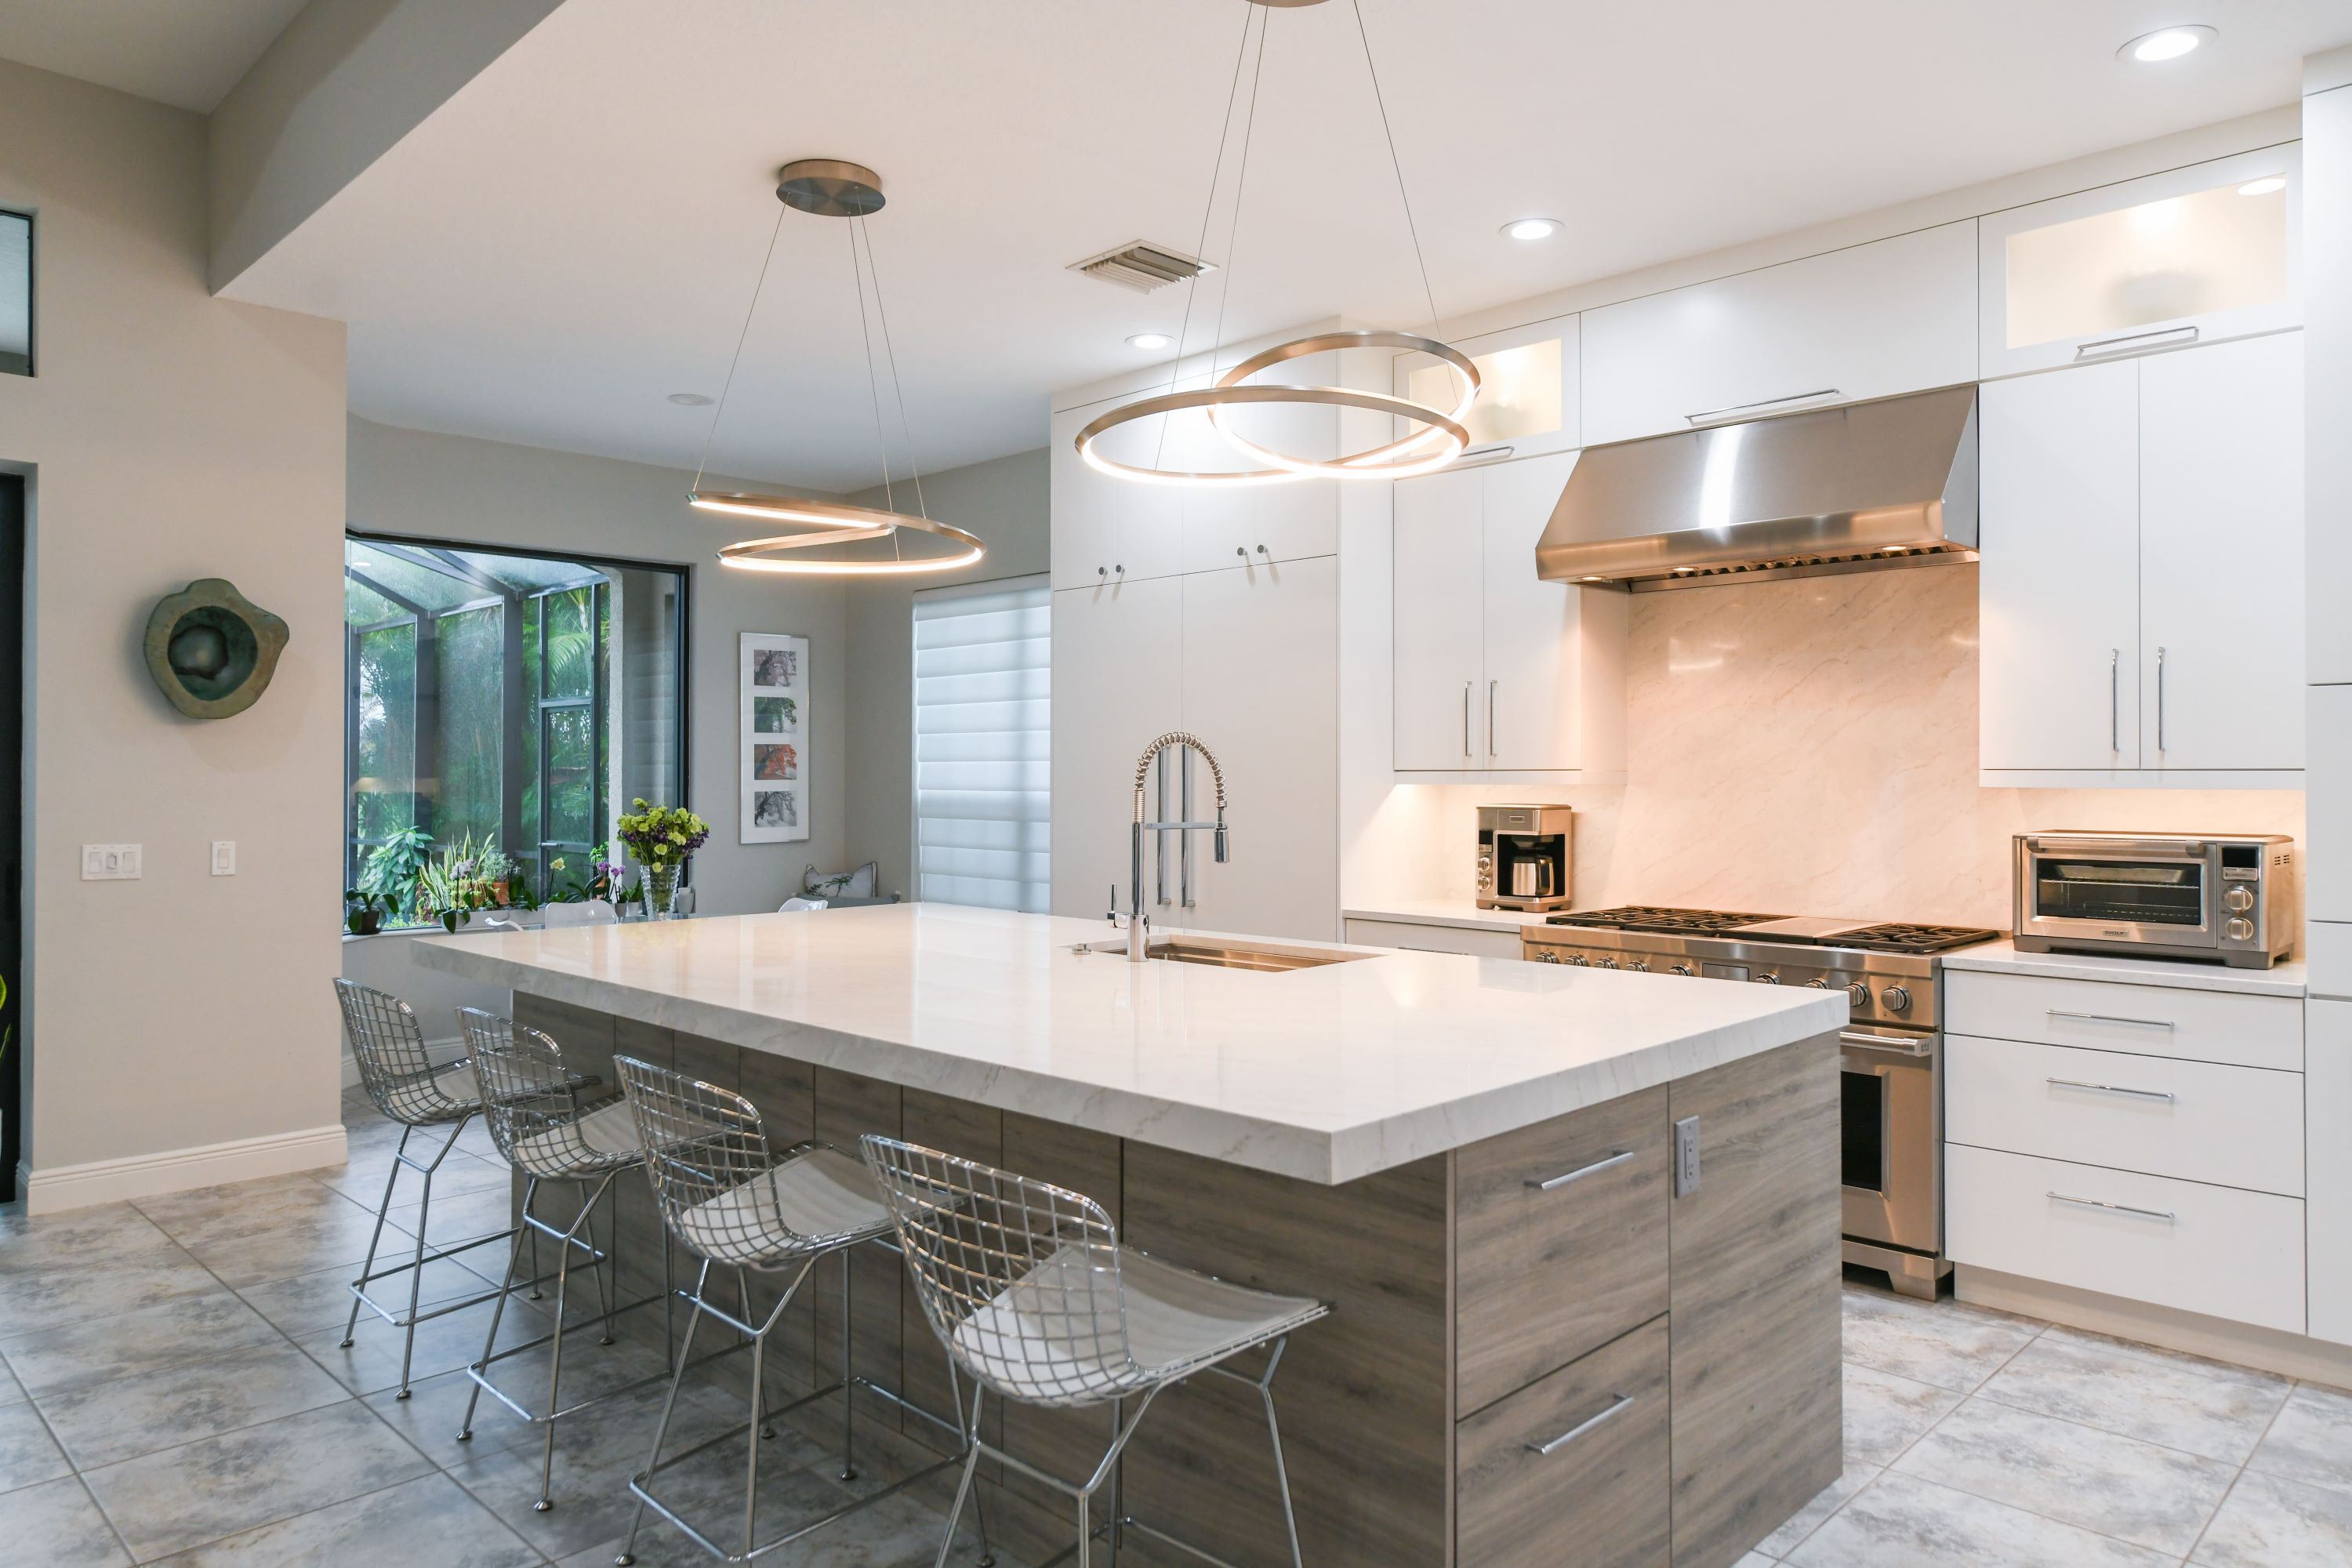 Island with Sink and Sculptural Pendant Lighting in Modern Sarasota Kitchen Remodel